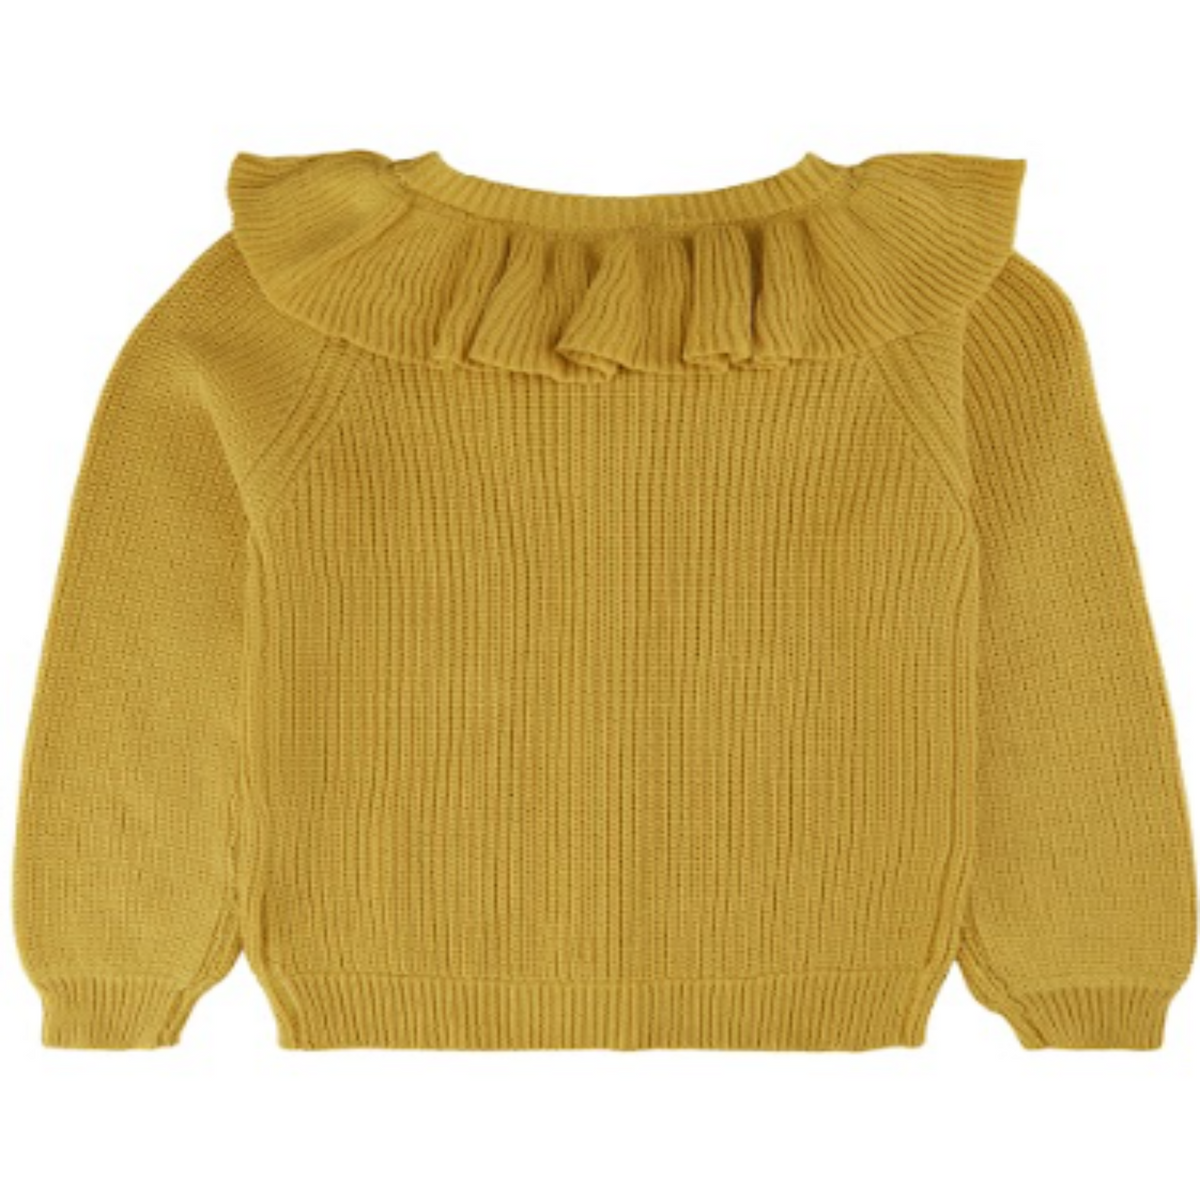 TNOlly Collar Cardigan - Misted yellow